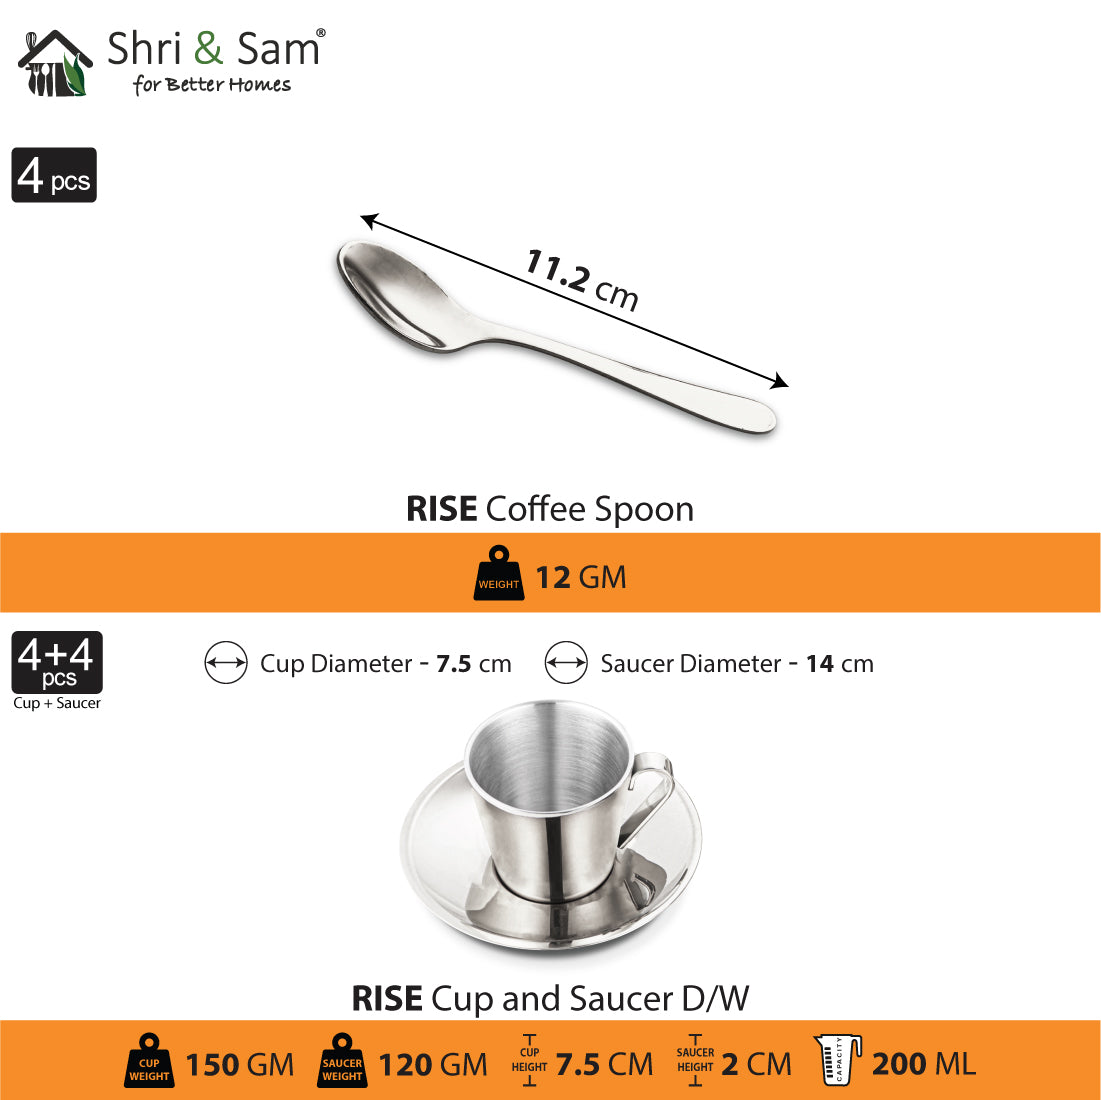 Stainless Steel 4 PCS Double Wall Cup and Saucer Rise